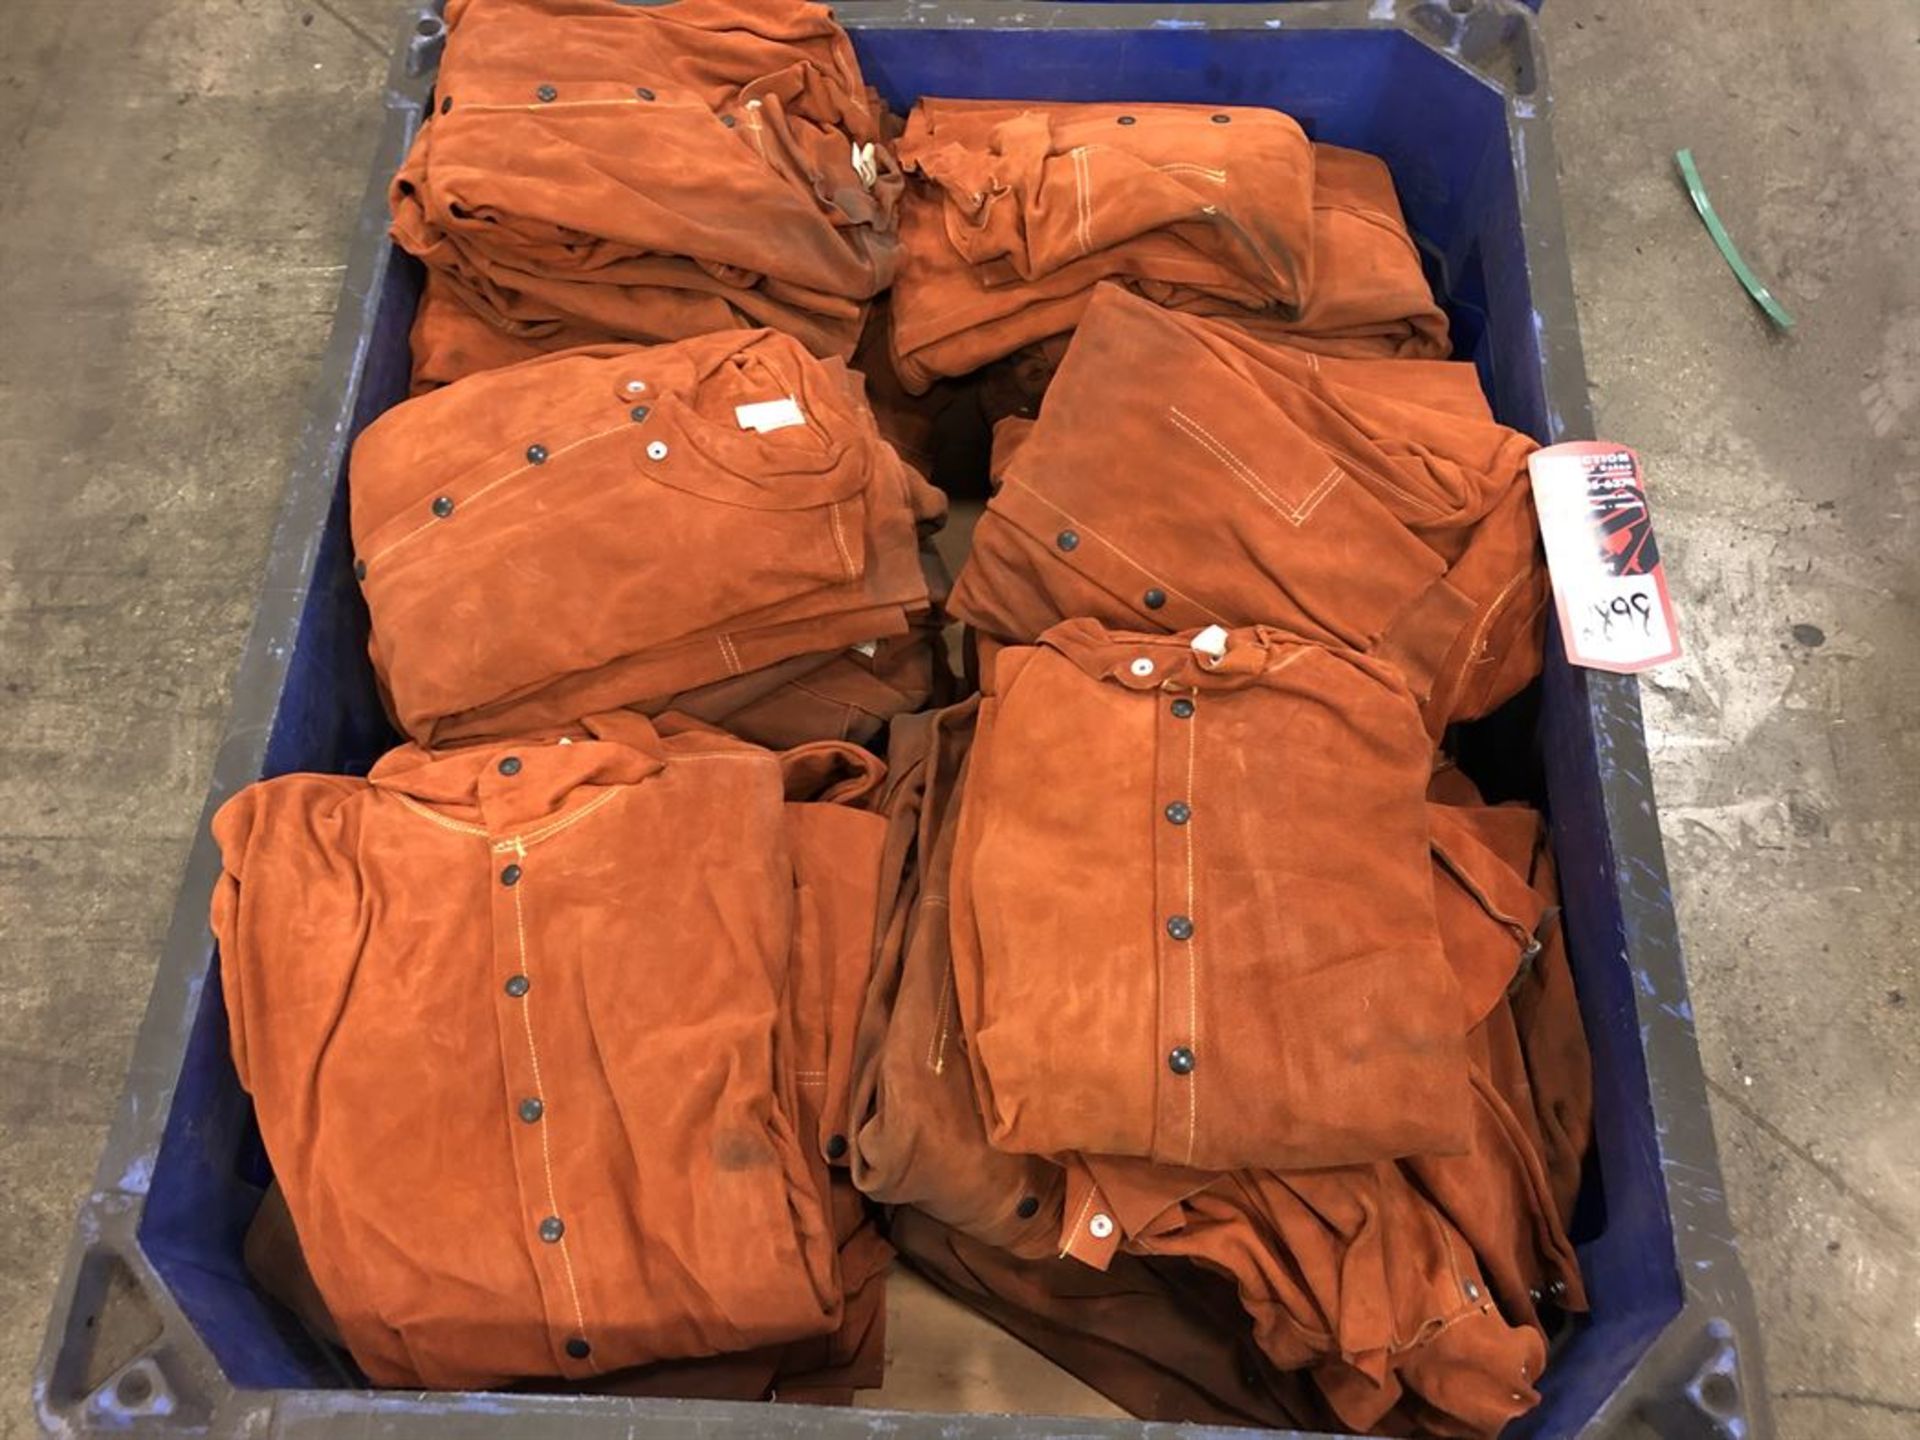 Lot Comprising Leather Welding Jackets, (23K)